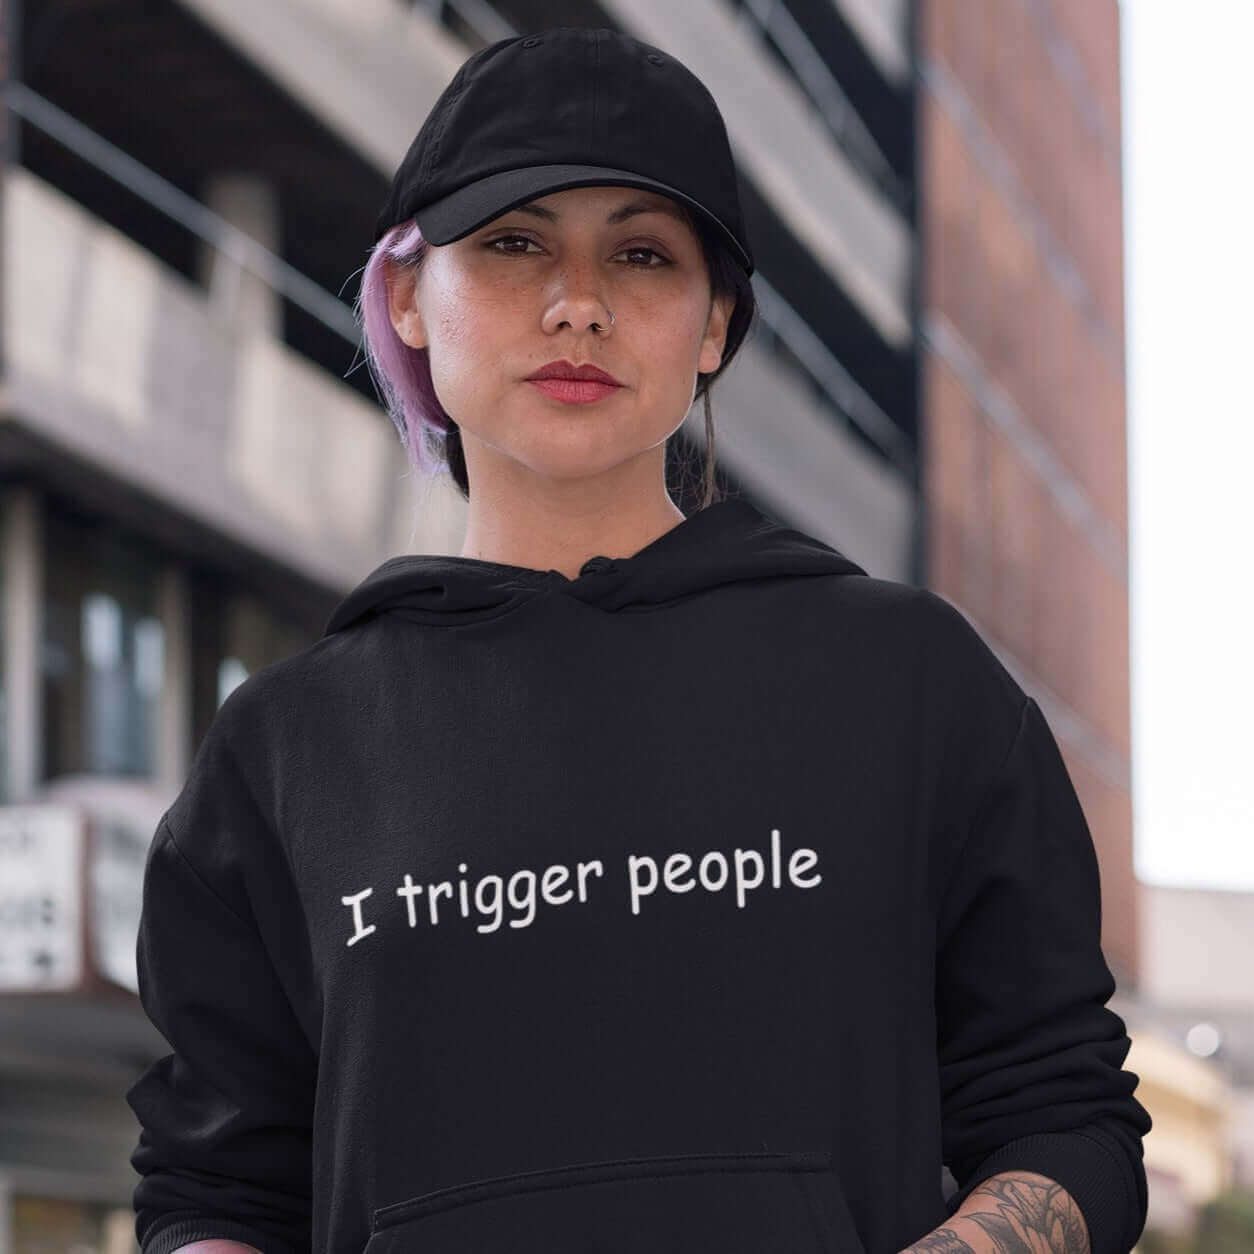 Woman wearing a black hoodie sweatshirt with the phrase I trigger people printed on the front.